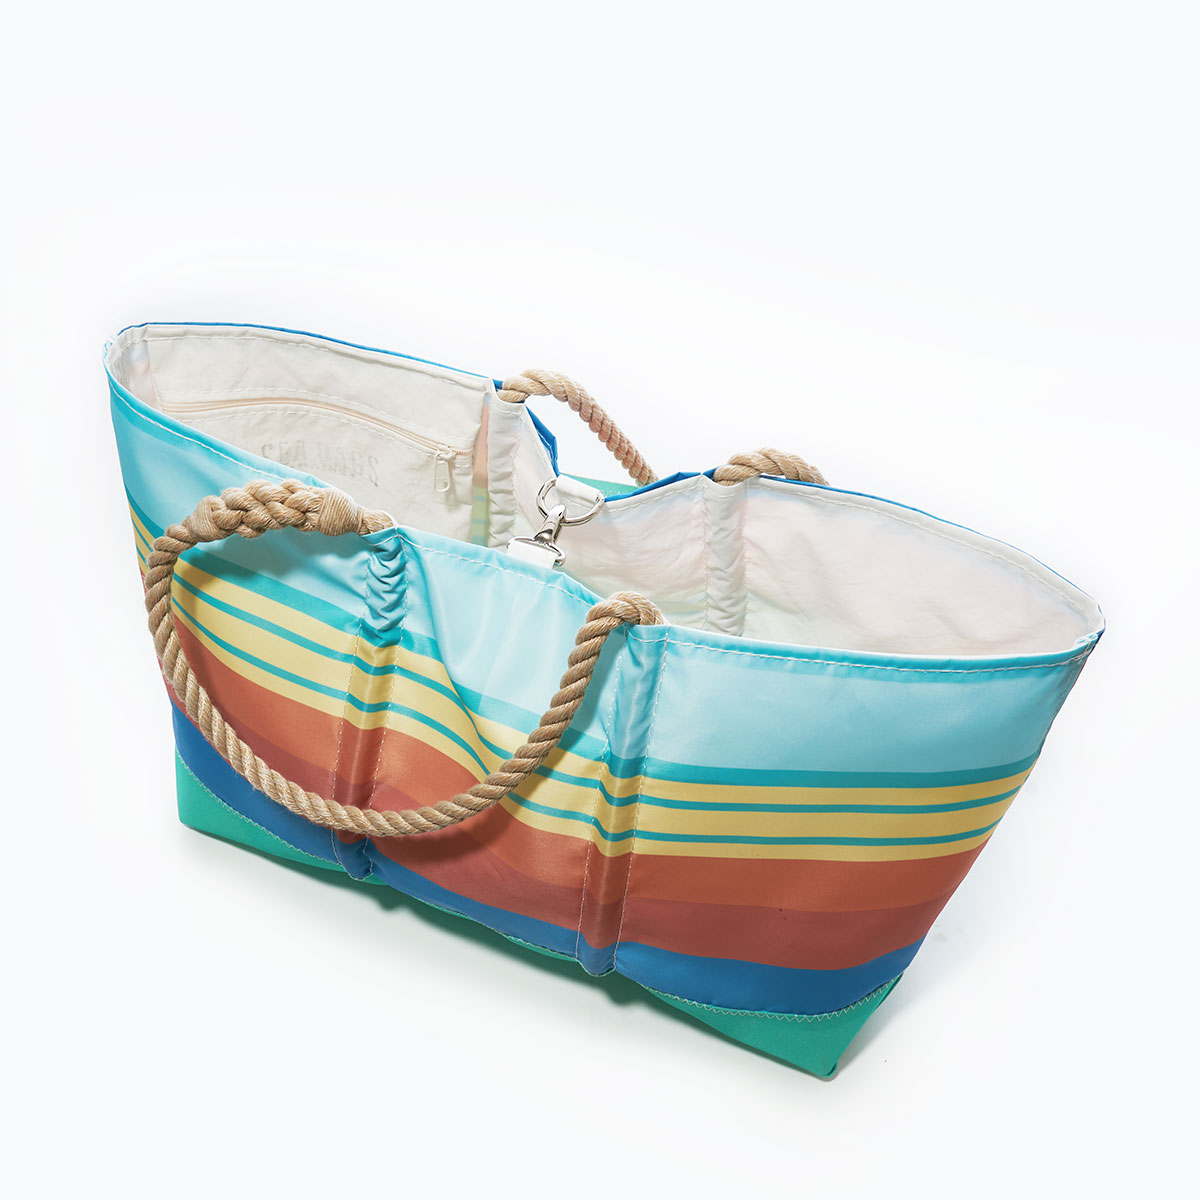 clasp closure on stripes in blue orange yellow and aquamarine printed on a recycled sail cloth beach tote with hemp rope handles